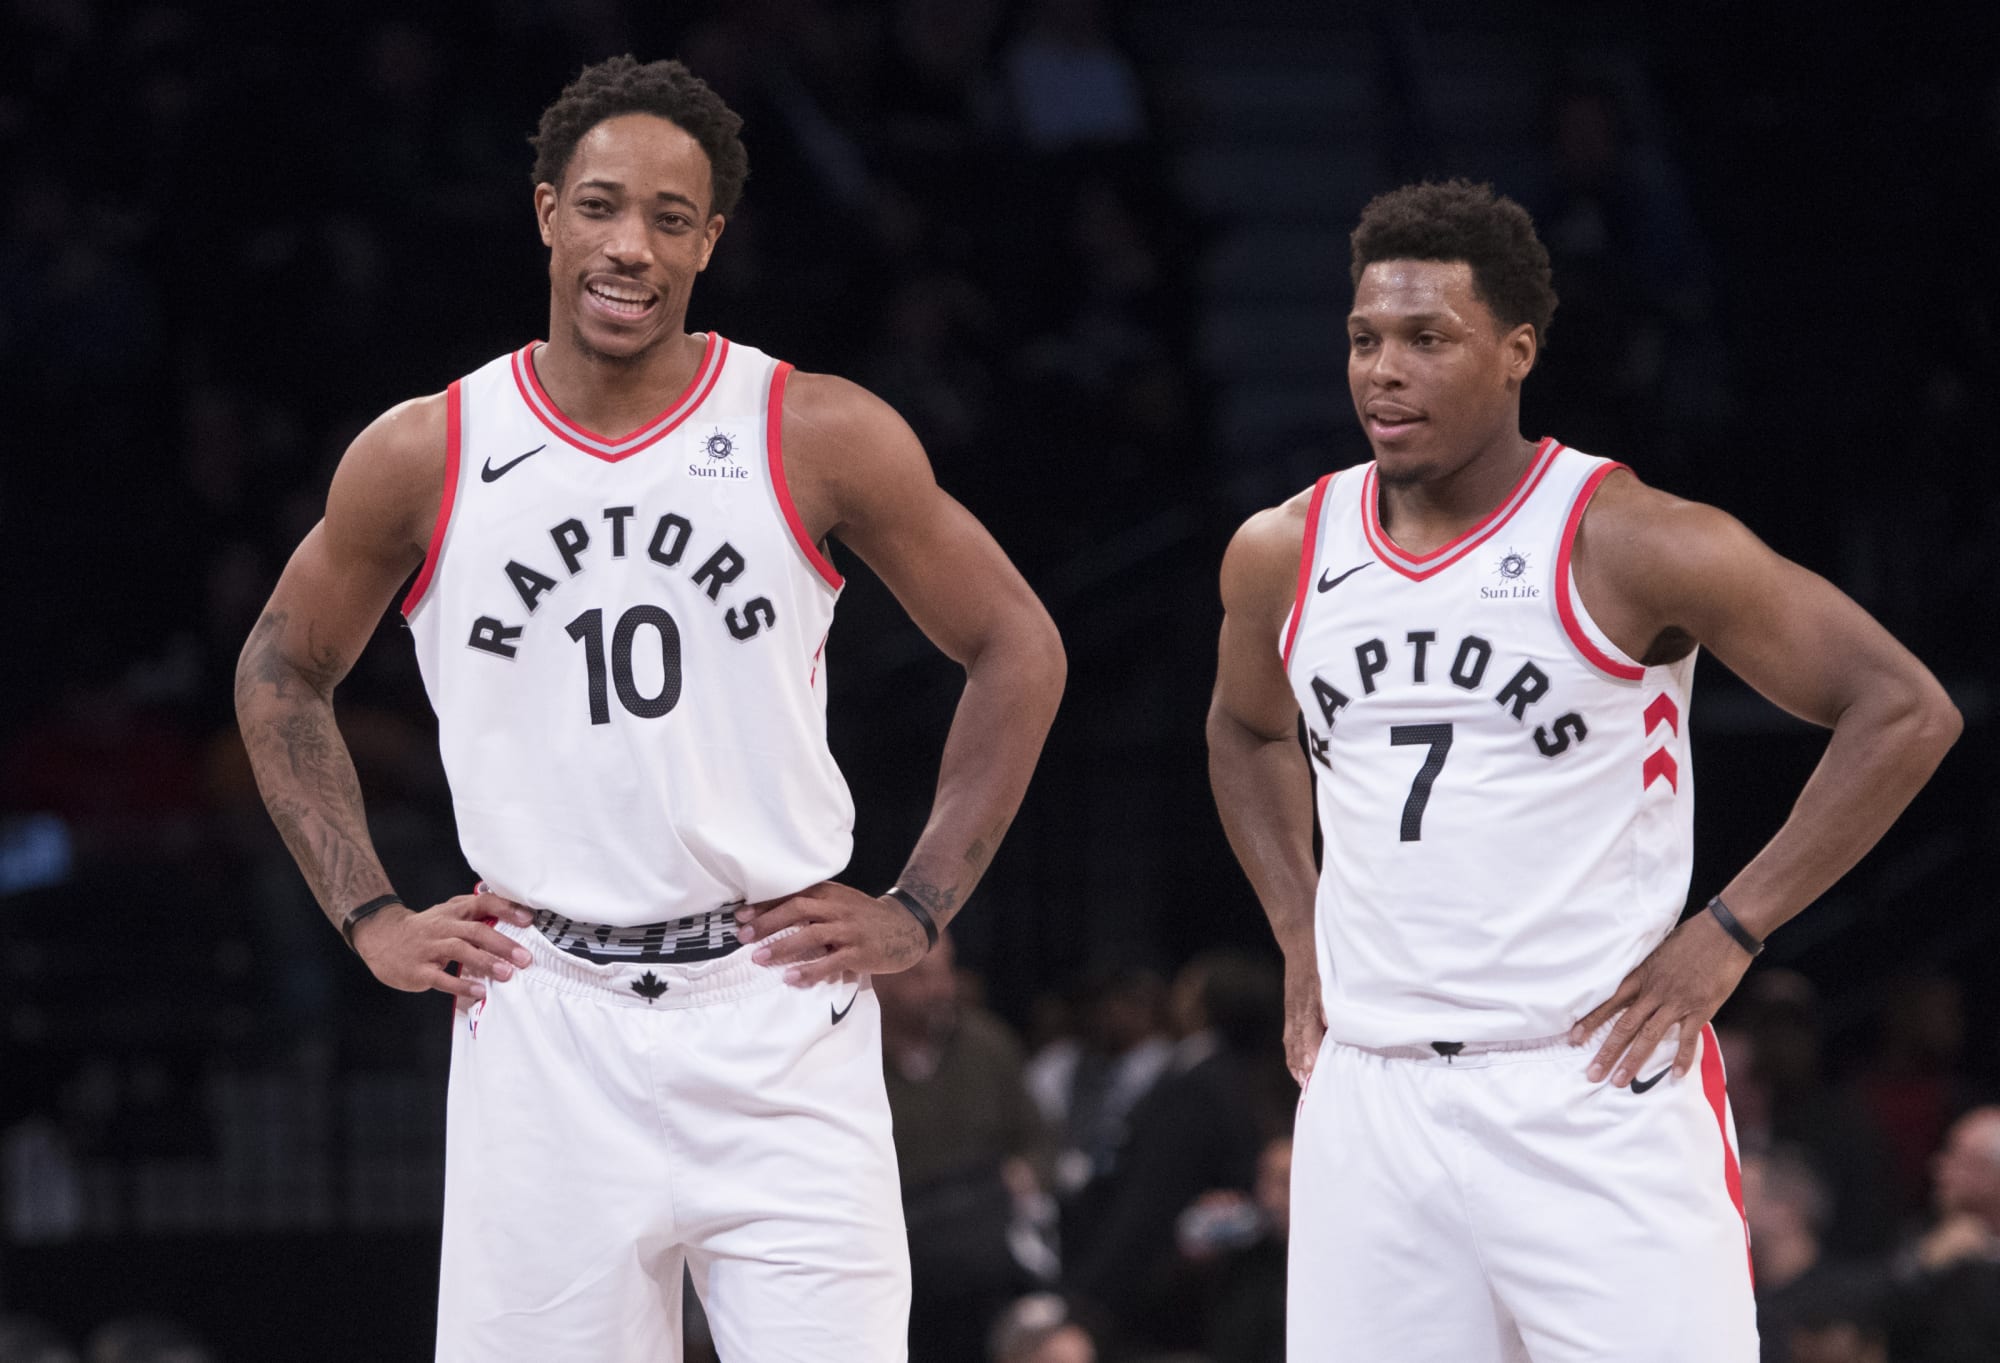 Top 10 all-time assisters in Toronto Raptors franchise history